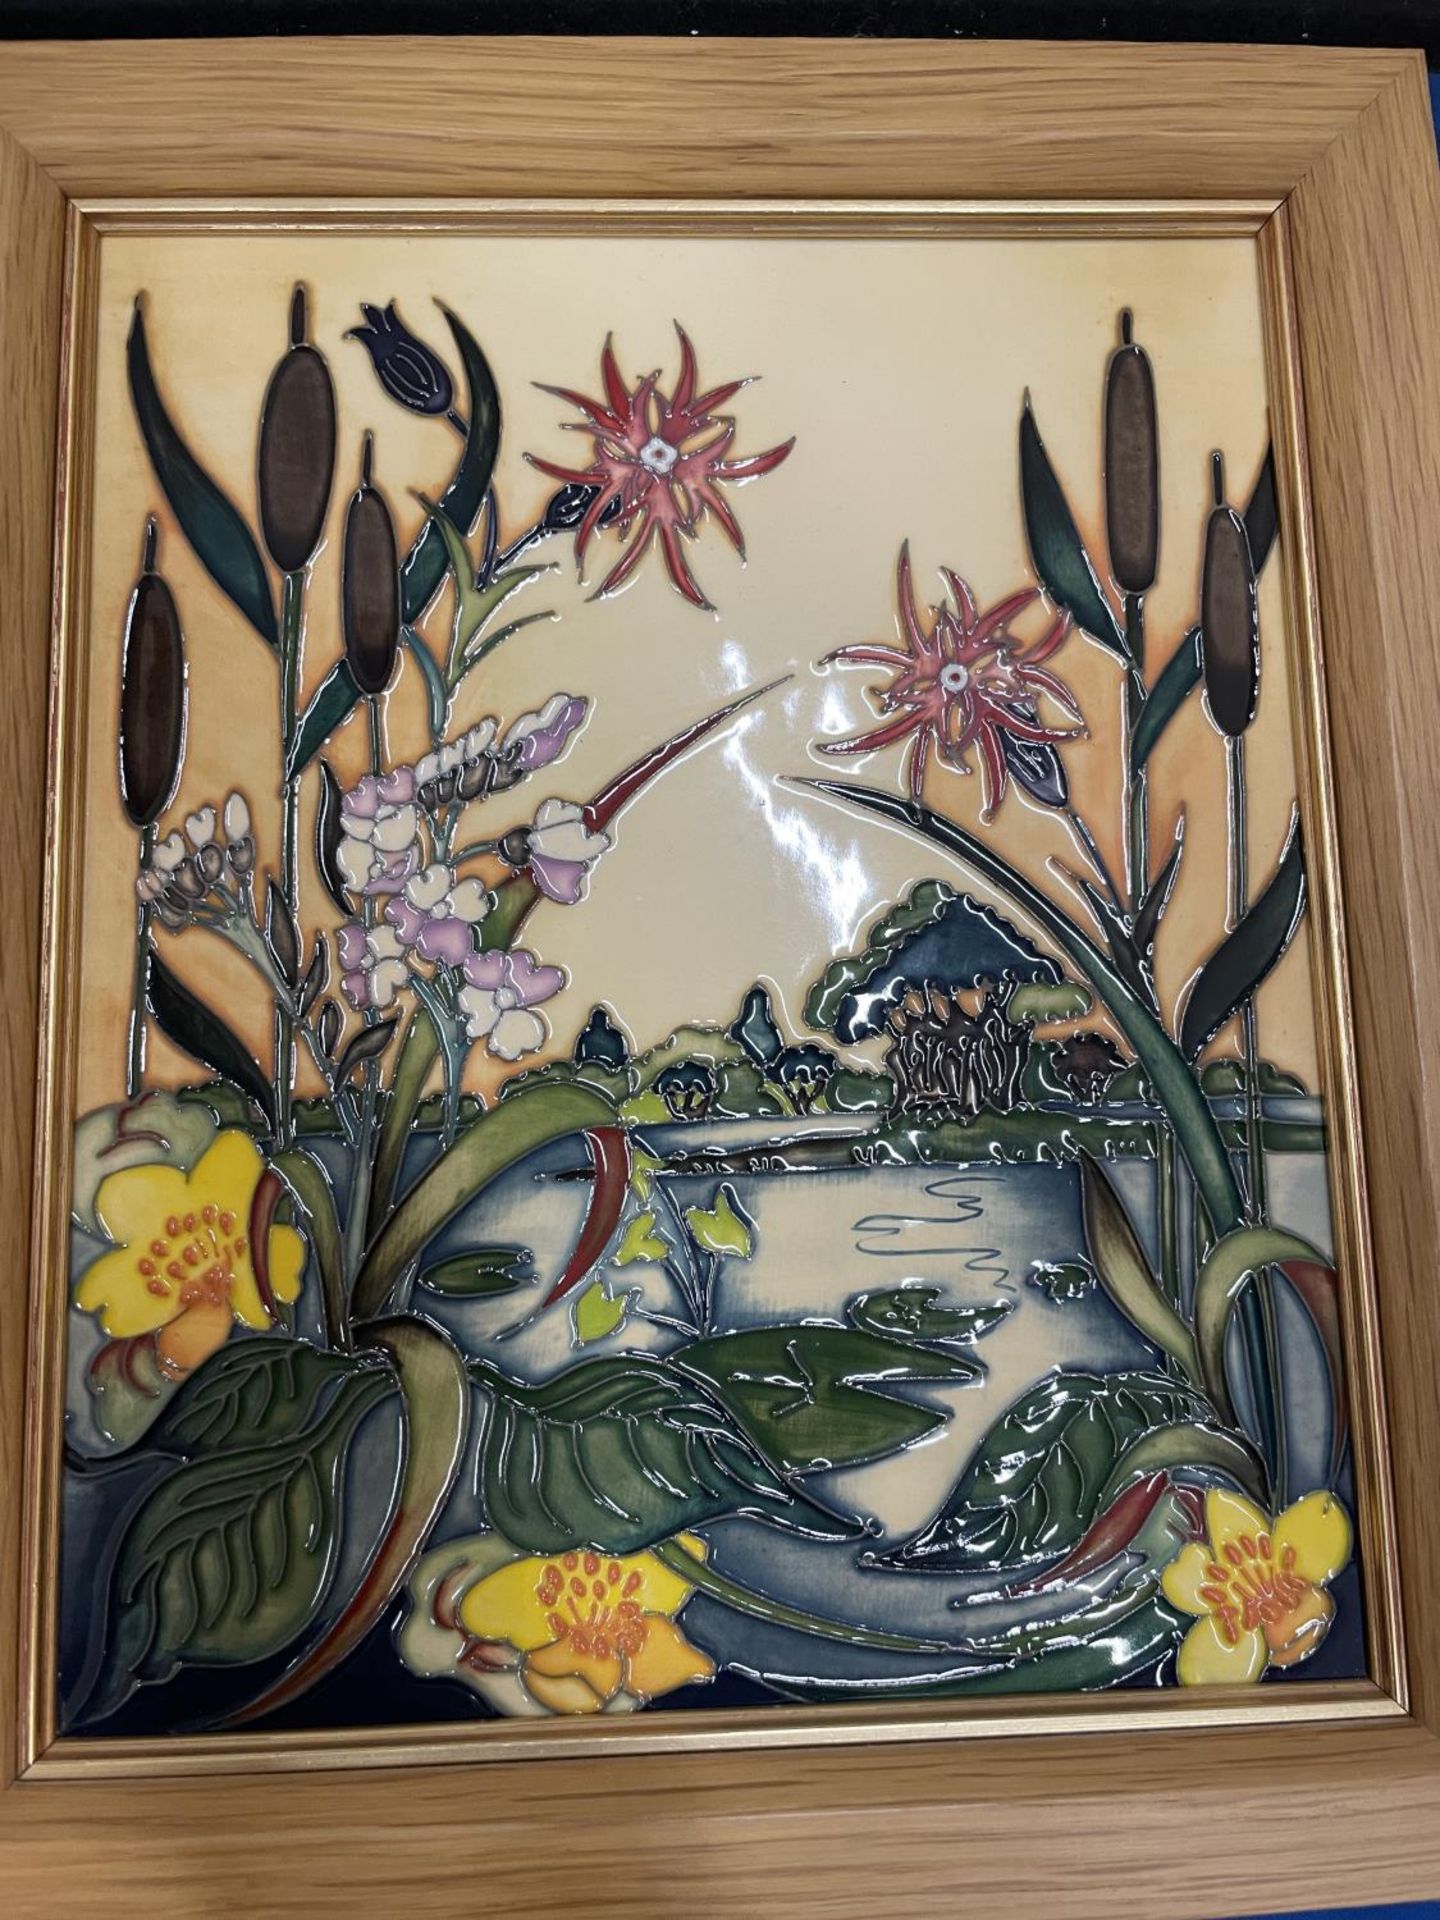 A MOORCROFT FRAMED PLAQUE RUNNYMEAD (NICOLA STANLEY) 2015 - Image 3 of 6